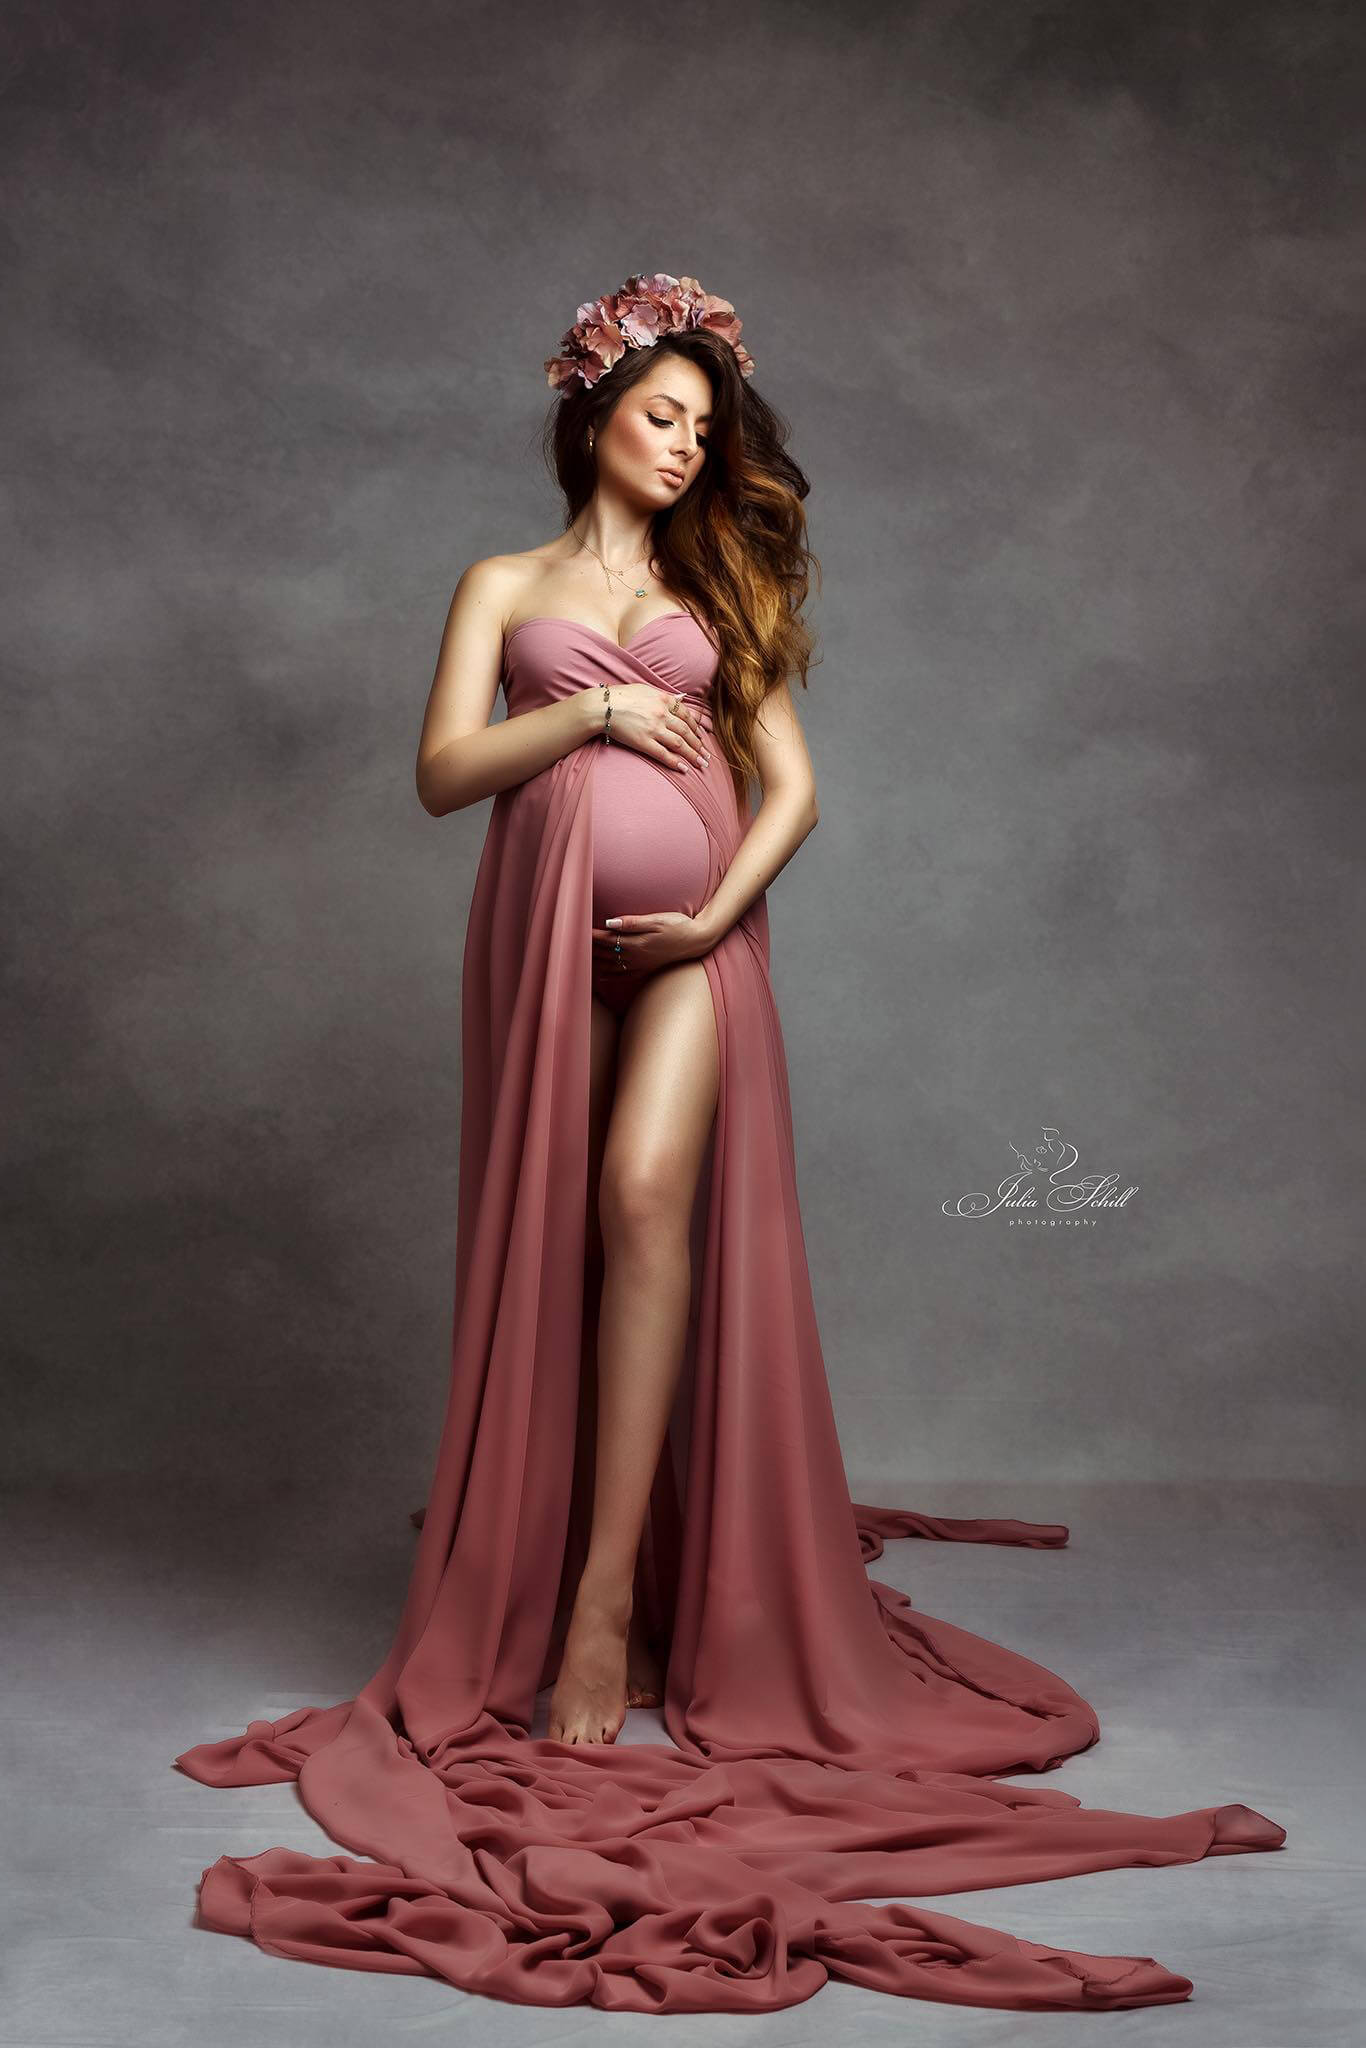 dark blond pregnant model poses in a studio against a grey background. the model wears a pink strapless maternity bodysuit. the bodysuit has a chiffon skirt attached. the skirt has a middle front split where one of her legs can be seen through. she has her eyes closed and holds her bump with both hands. 